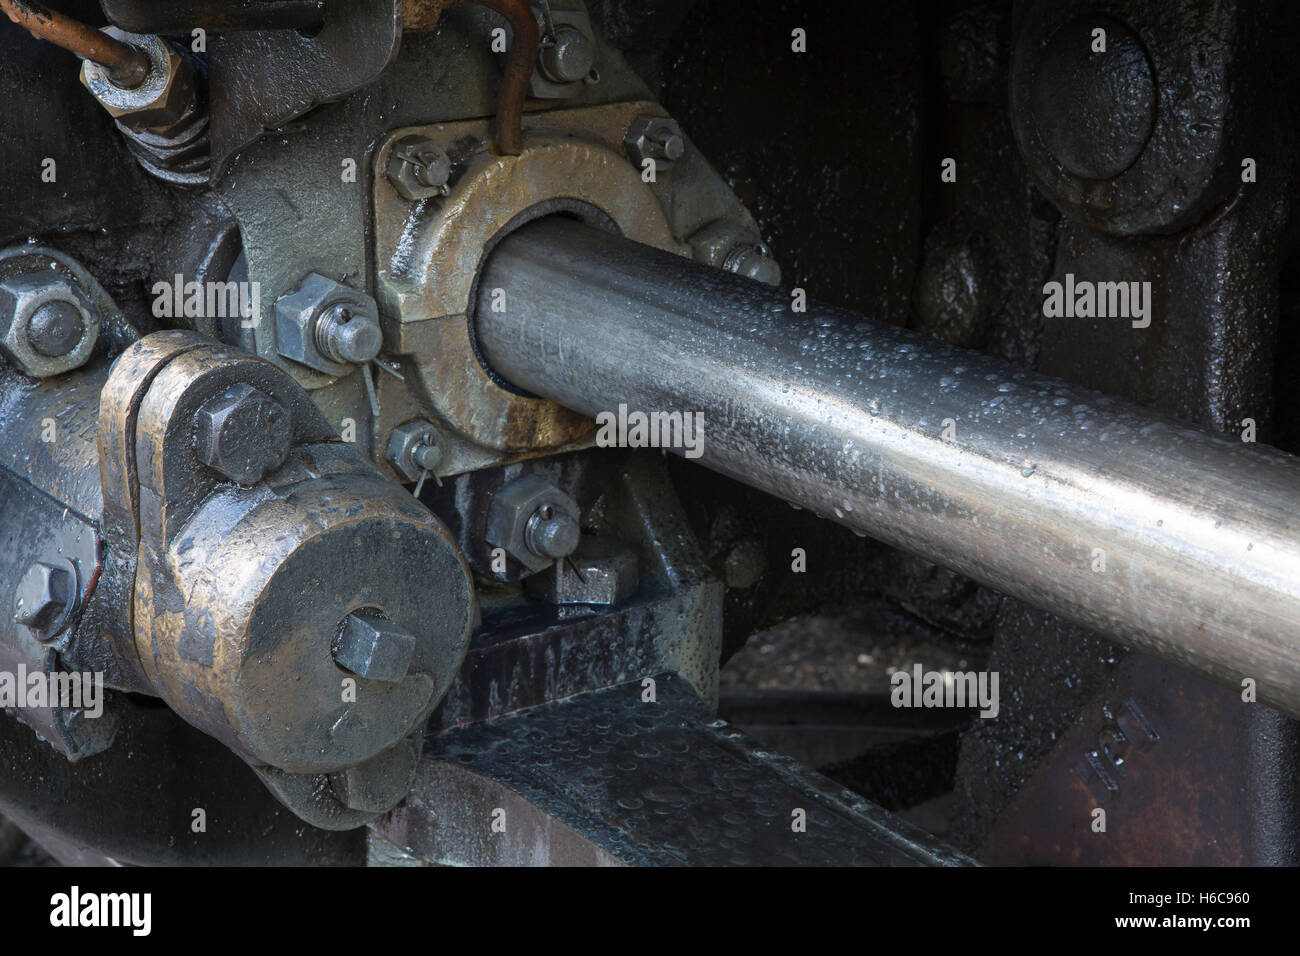 Heavy metal machinery. Piston on an old steam train. Oily closeup of the moving parts. Stock Photo